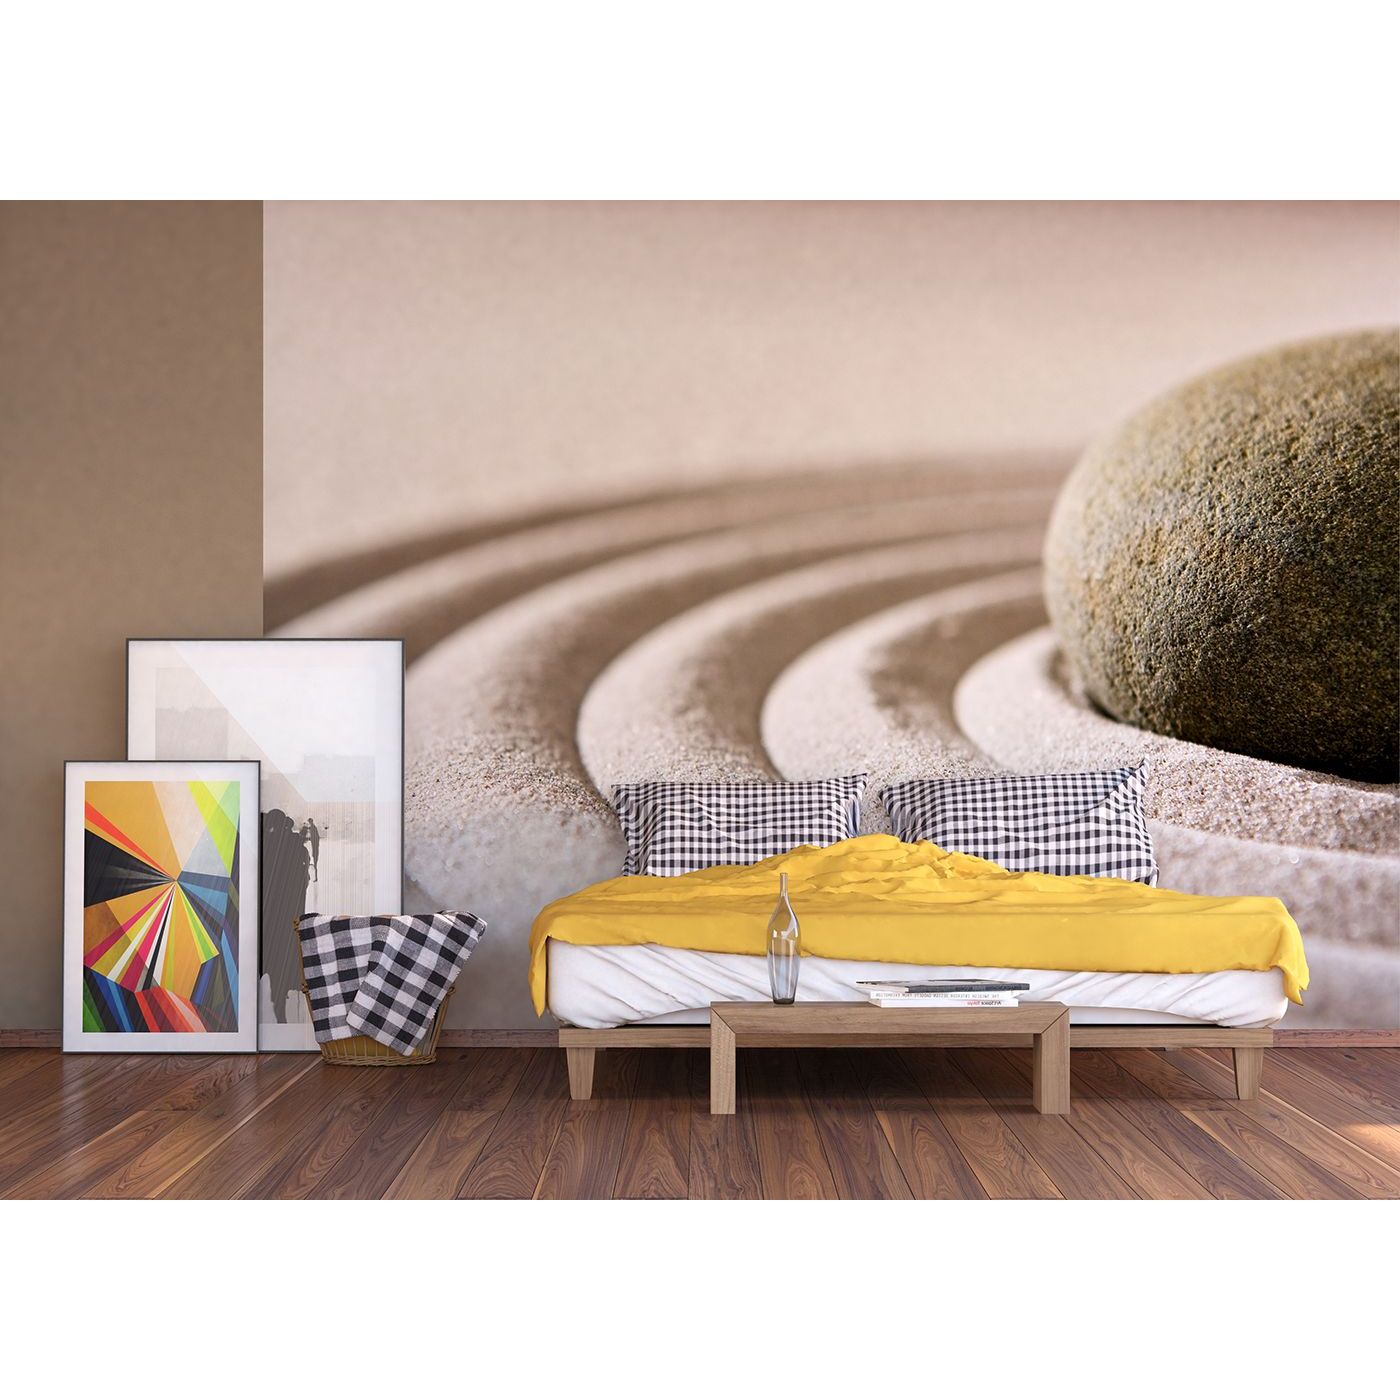 Serene Contours: Zen Stone and Sand Symmetry Wall Mural